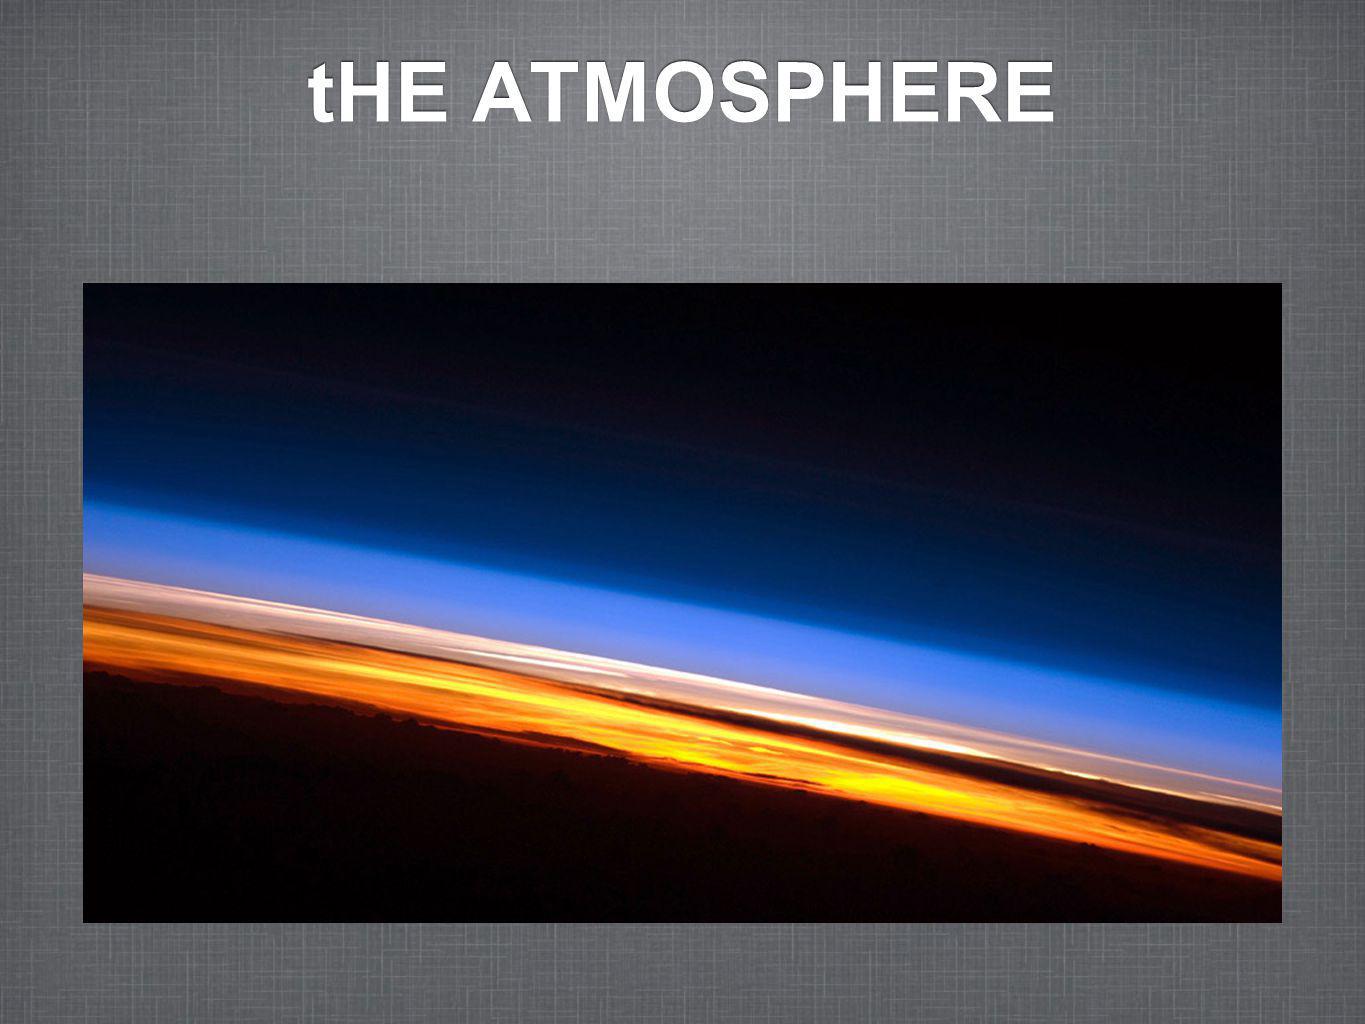 tHE ATMOSPHERE